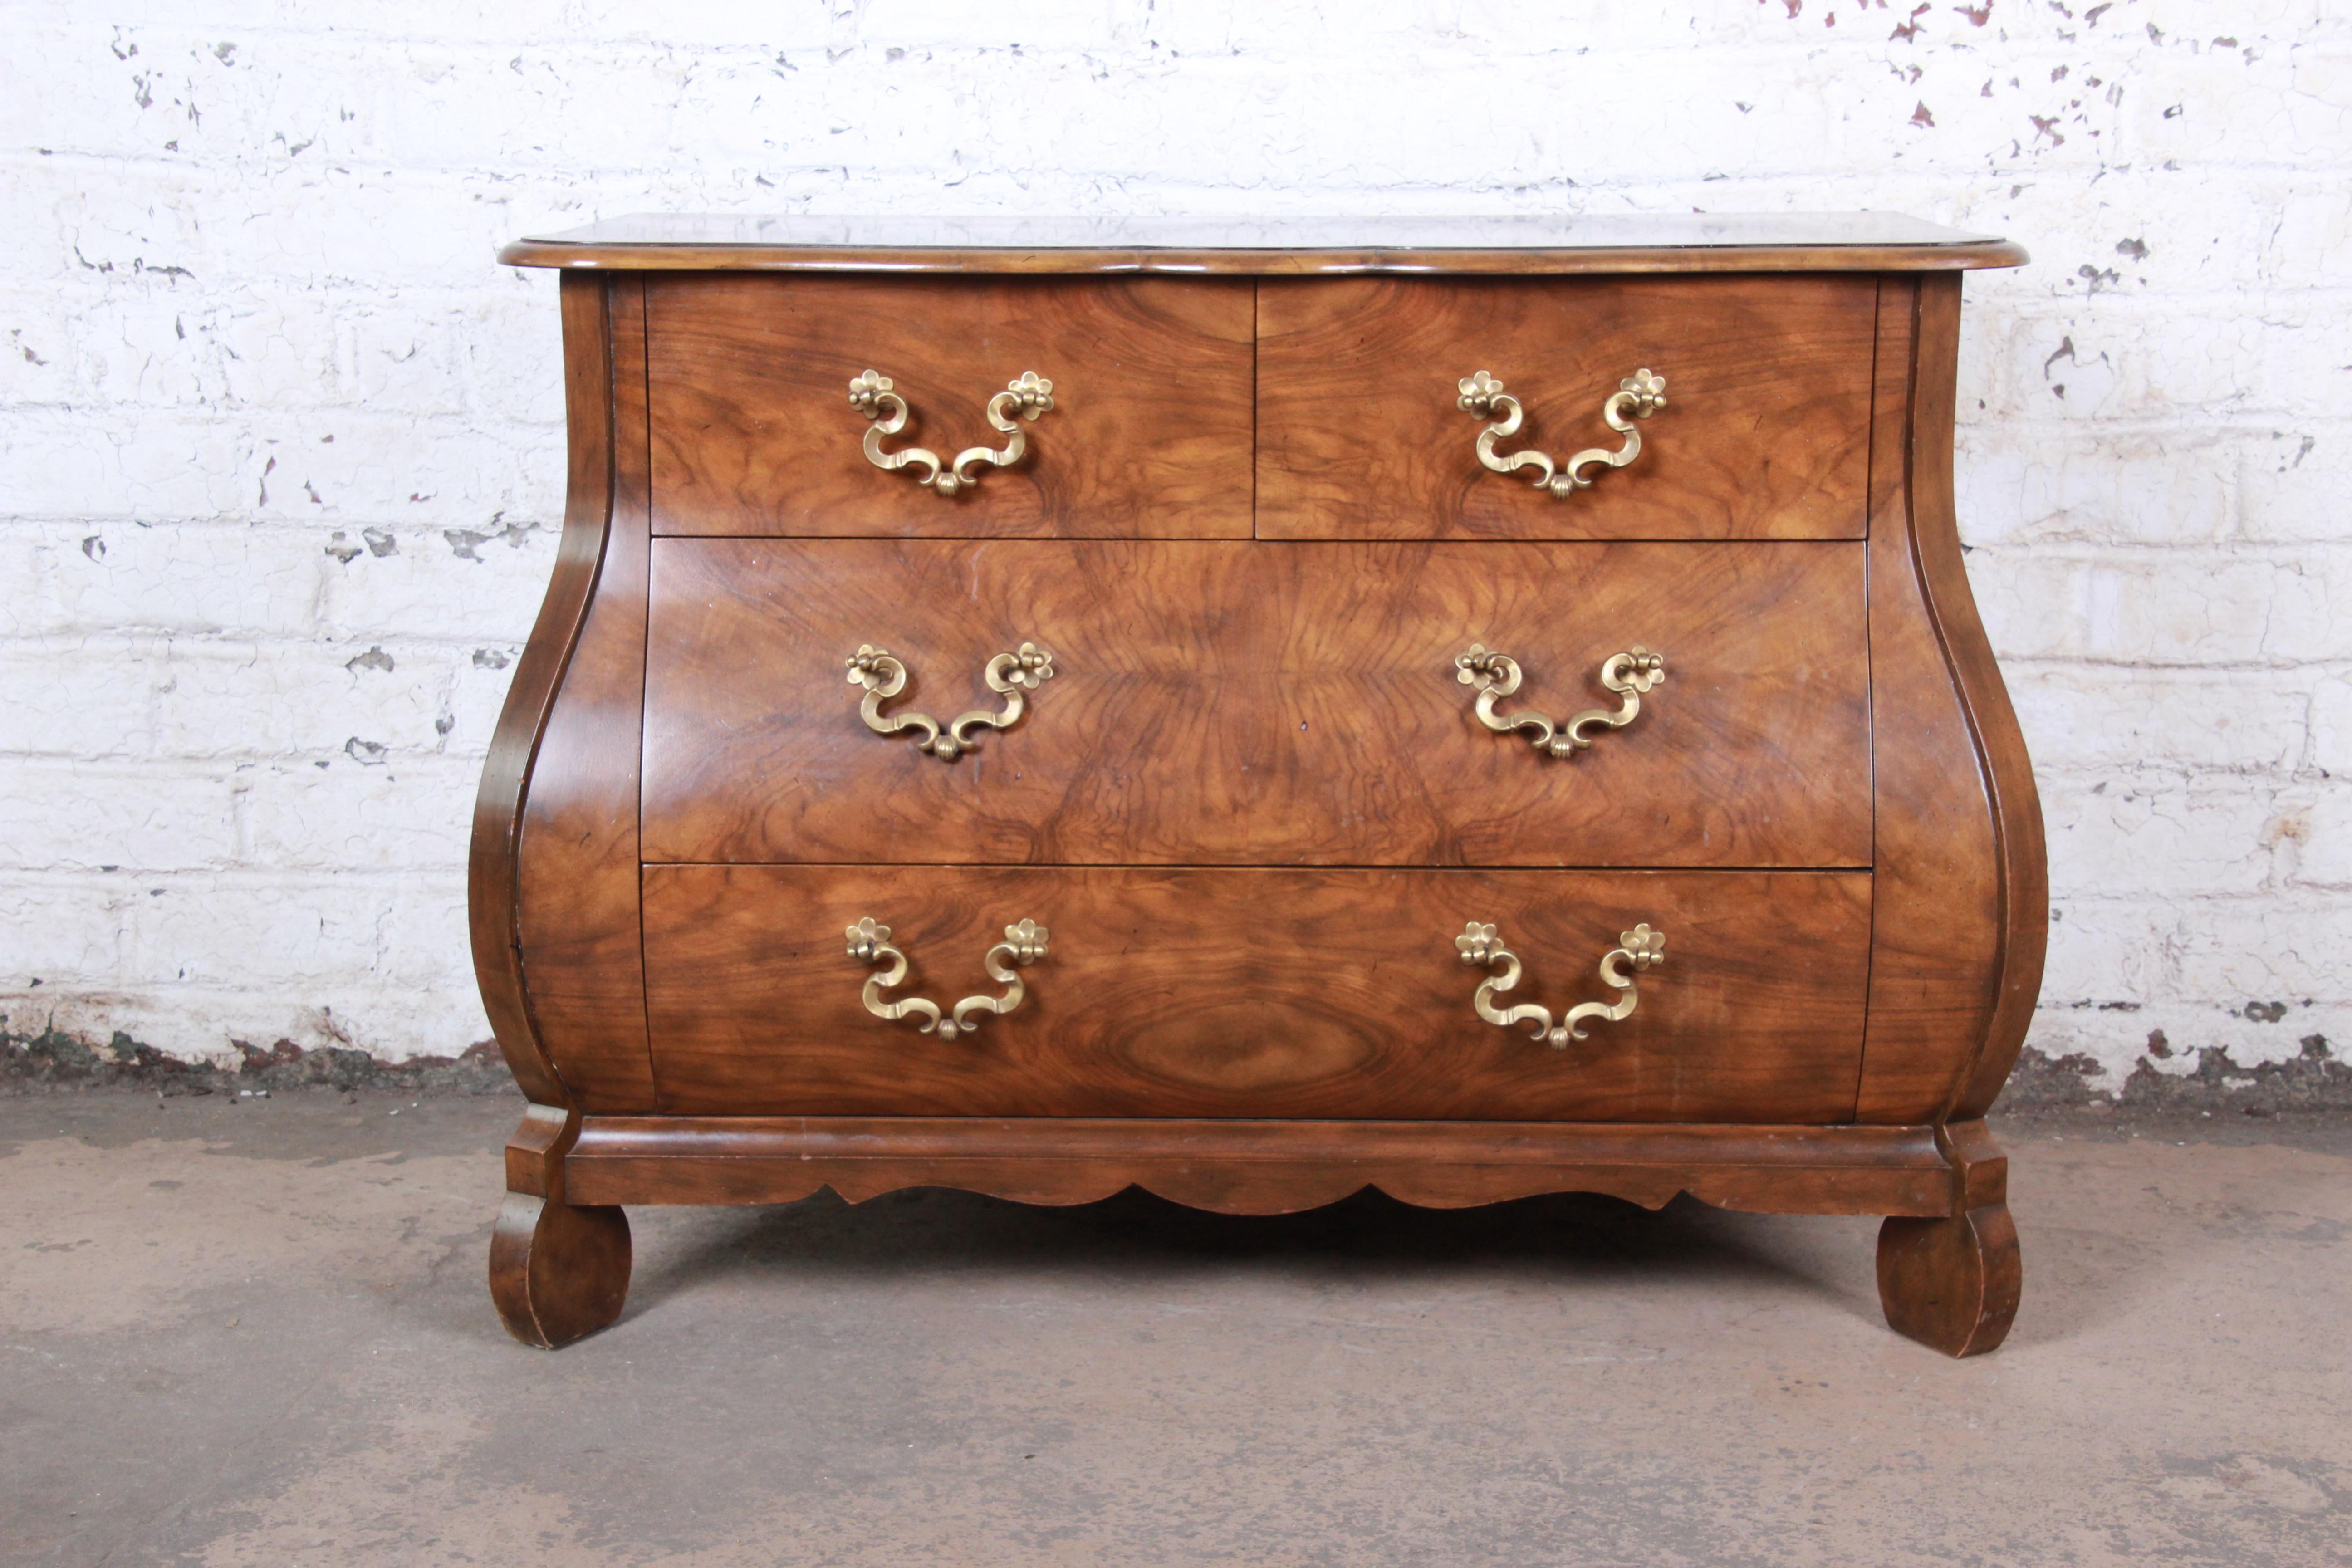 An exceptional French style Bombay chest or commode by Baker Furniture. The chest features gorgeous burled walnut wood grain, with a scalloped top and apron and canted corner front legs. It offers good storage, with four deep dovetailed drawers,